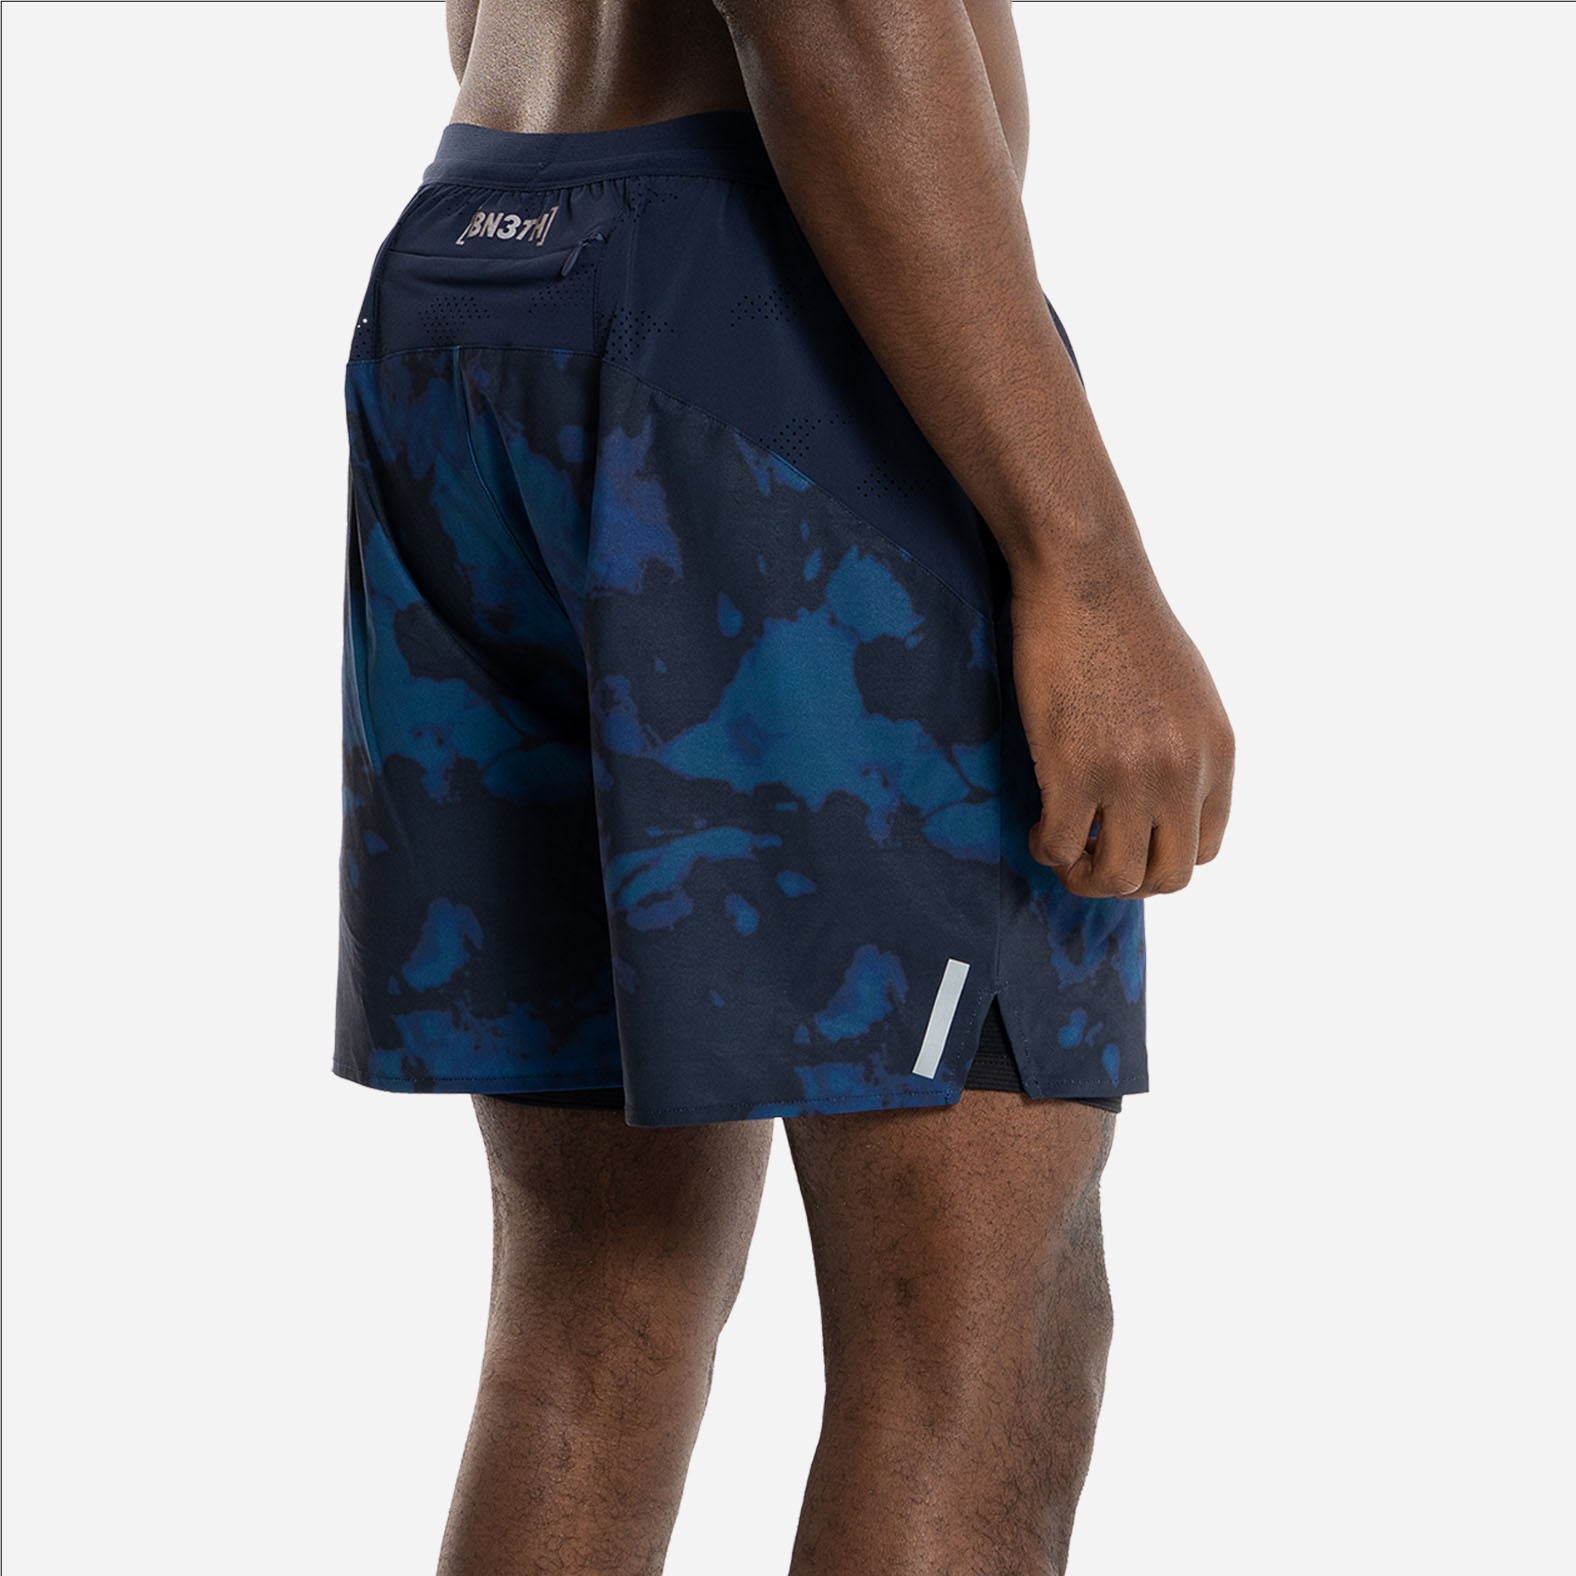 RUNNER'S HIGH 2N1 SHORT: WASHED OUT NAVY